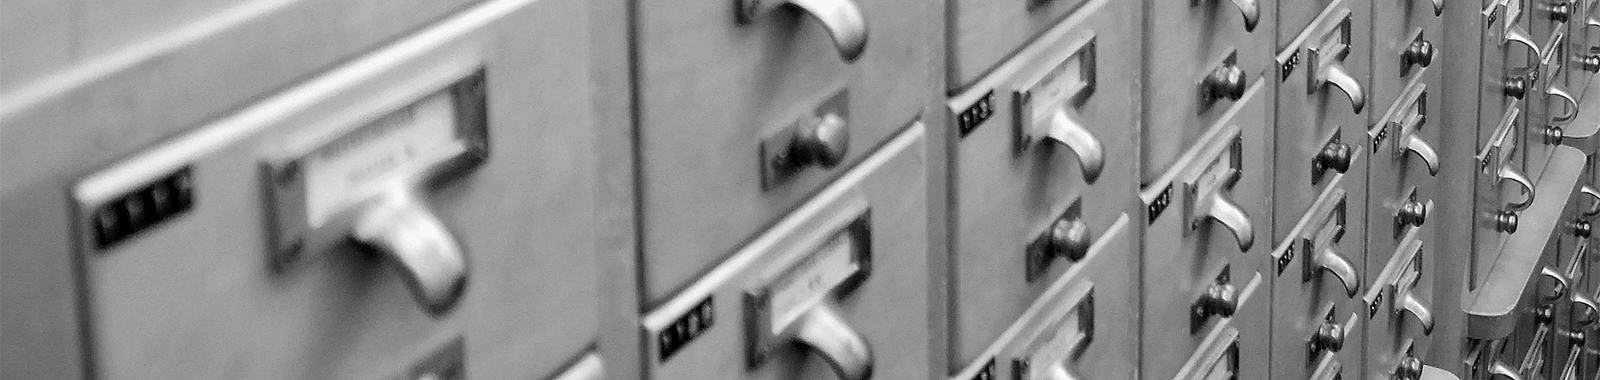 black and white photograph detail of the old card catalog cabinet at Hoover Library